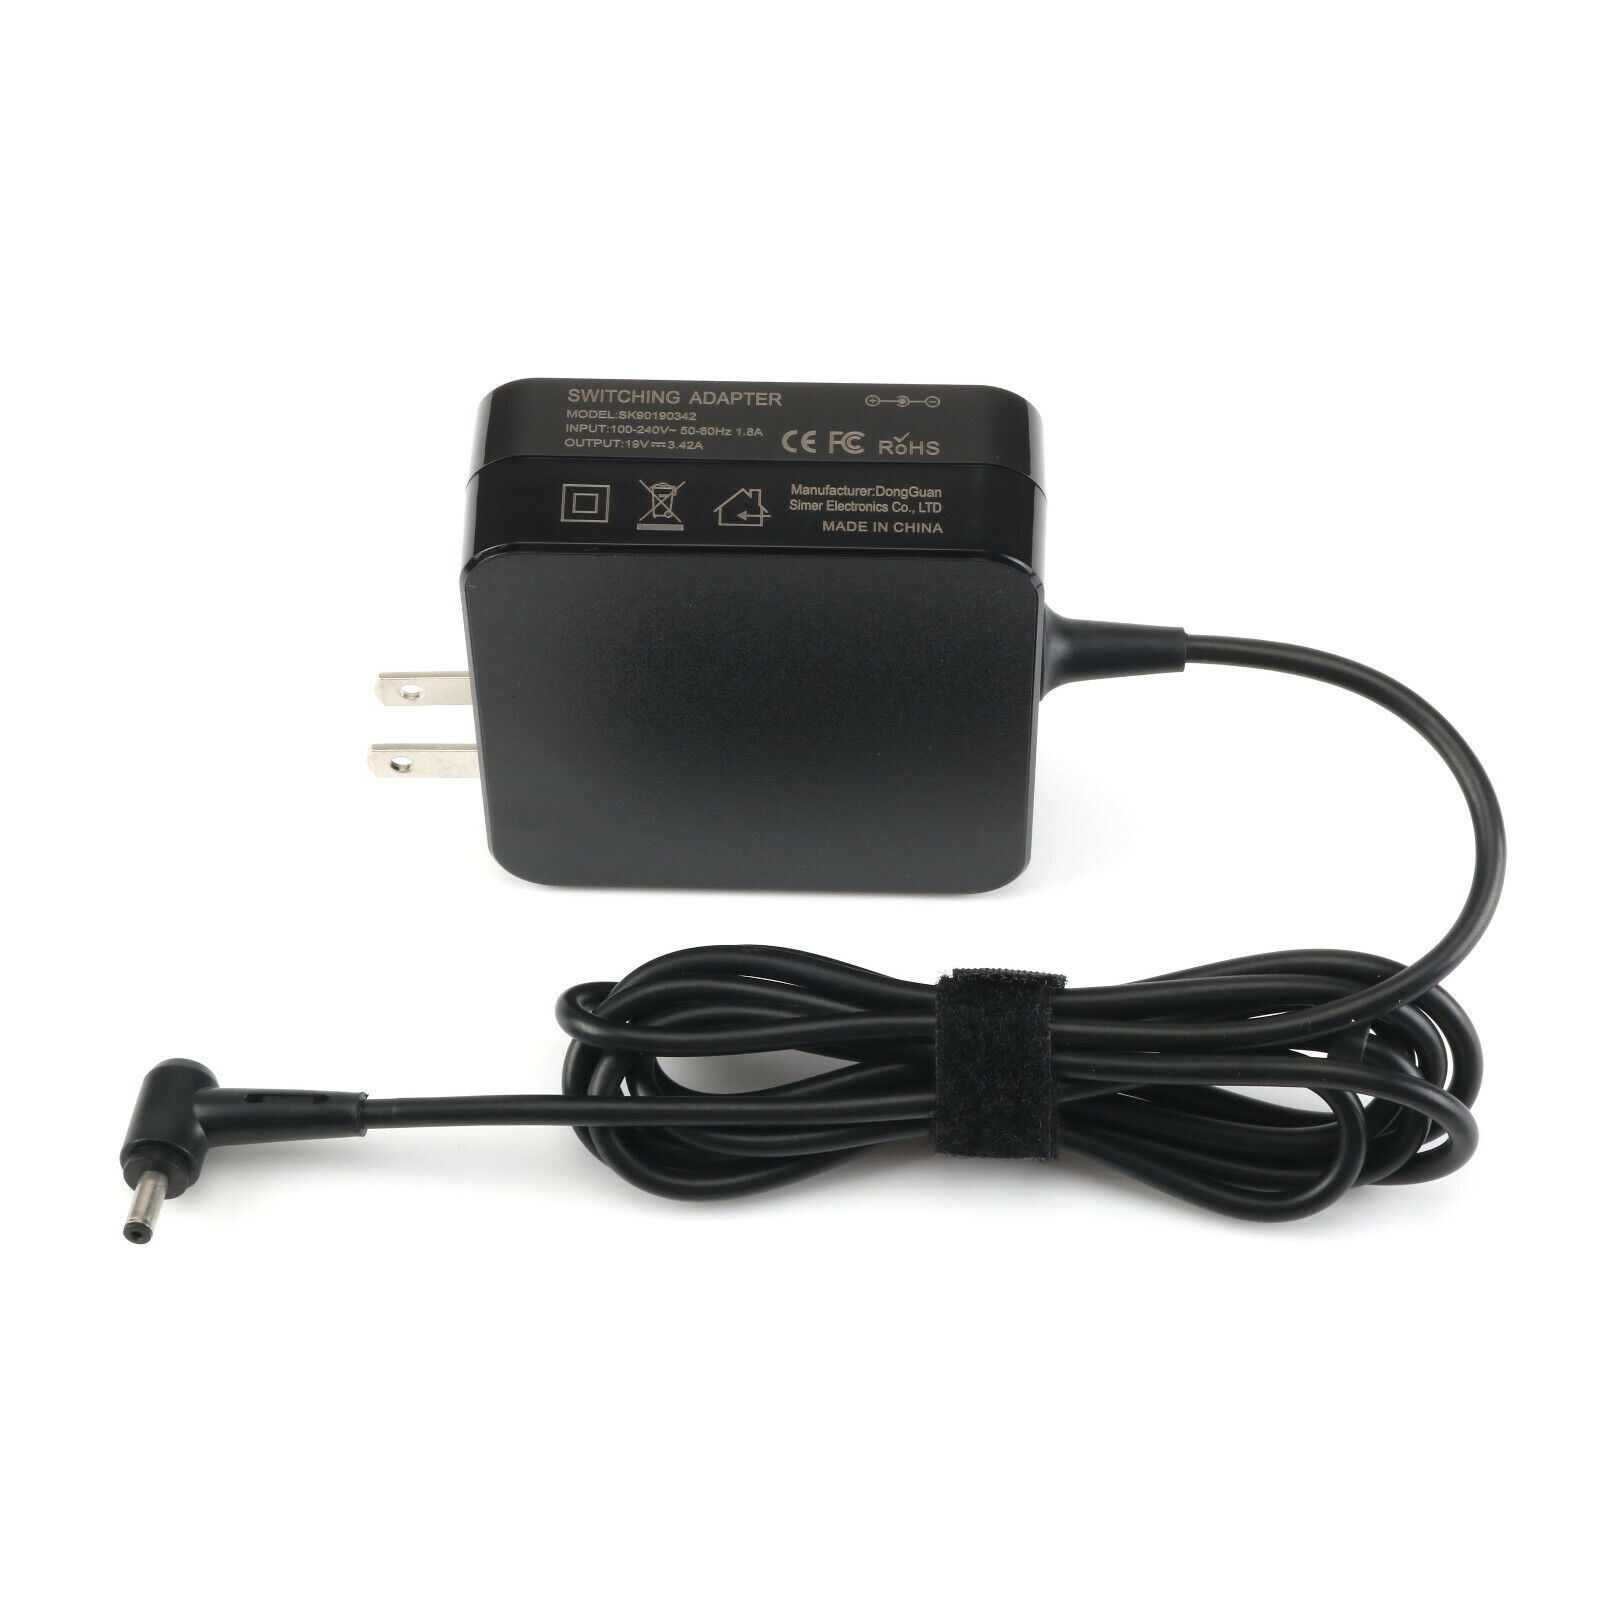 19V 3.42A AC Adapter Charger for Asus Zenbook UX305 UX301 UX330 UX360 UX303 UX32